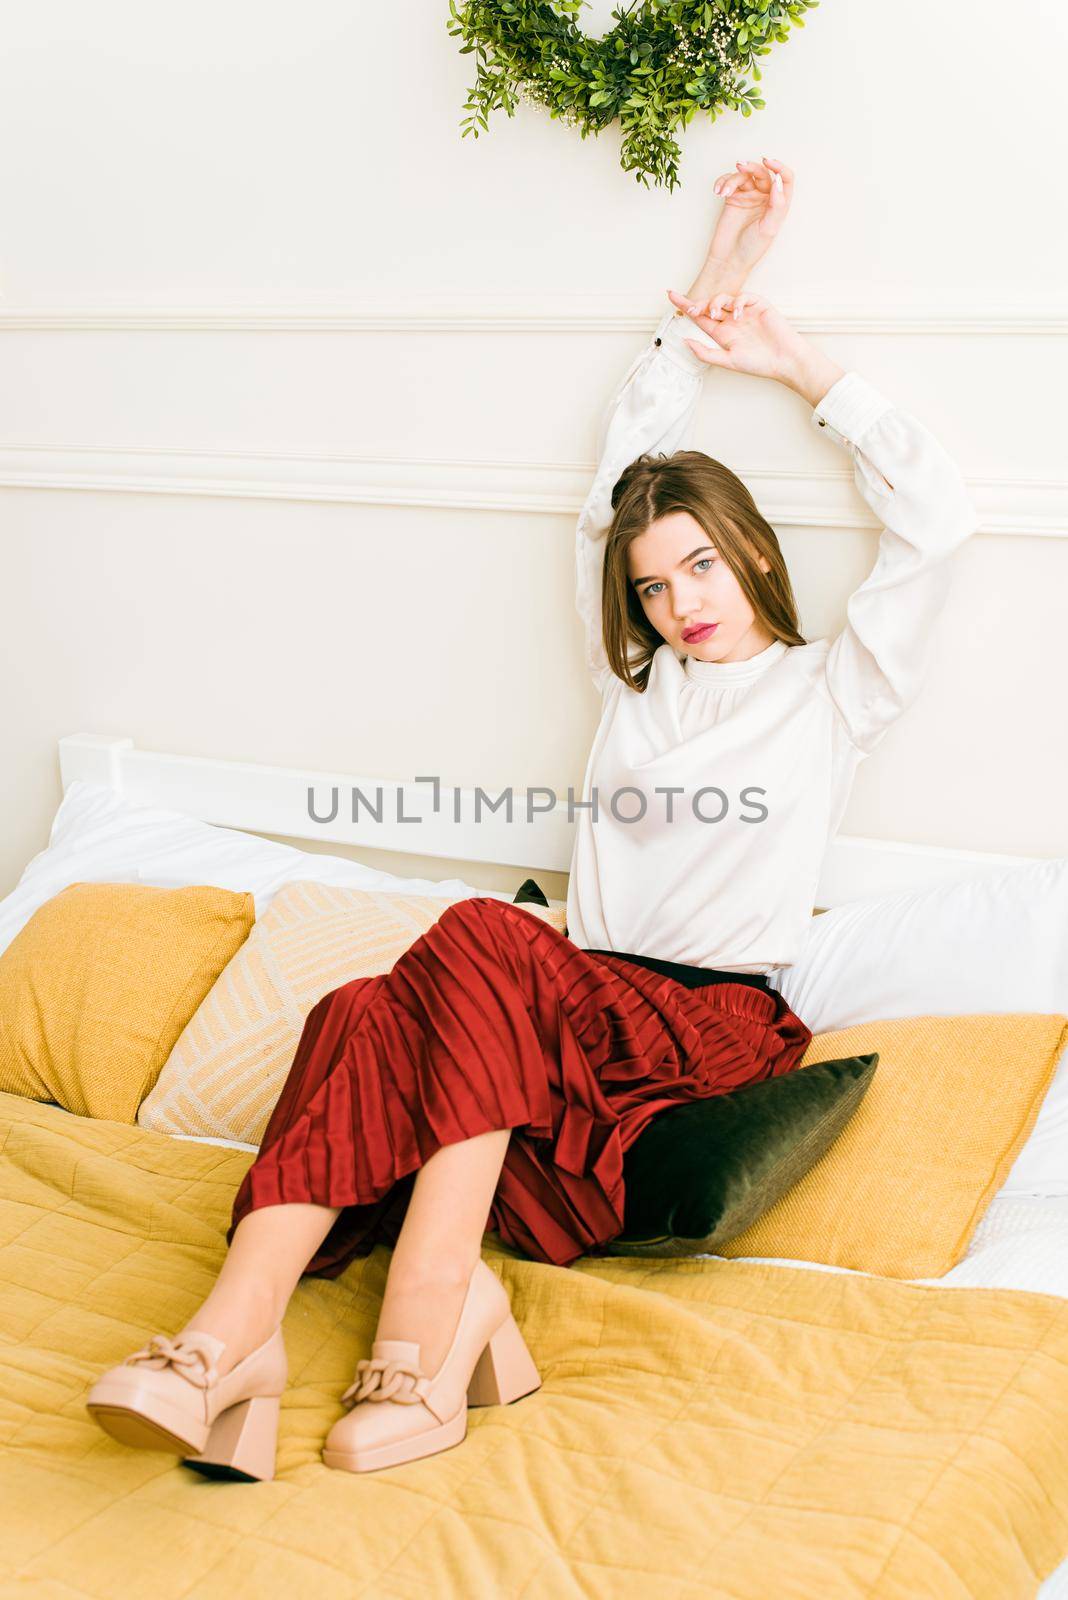 Portrait of fashionable women in red skirt, white blouse and stylish beige high-heeled shoes with a chain buckle posing in a bed by Ashtray25